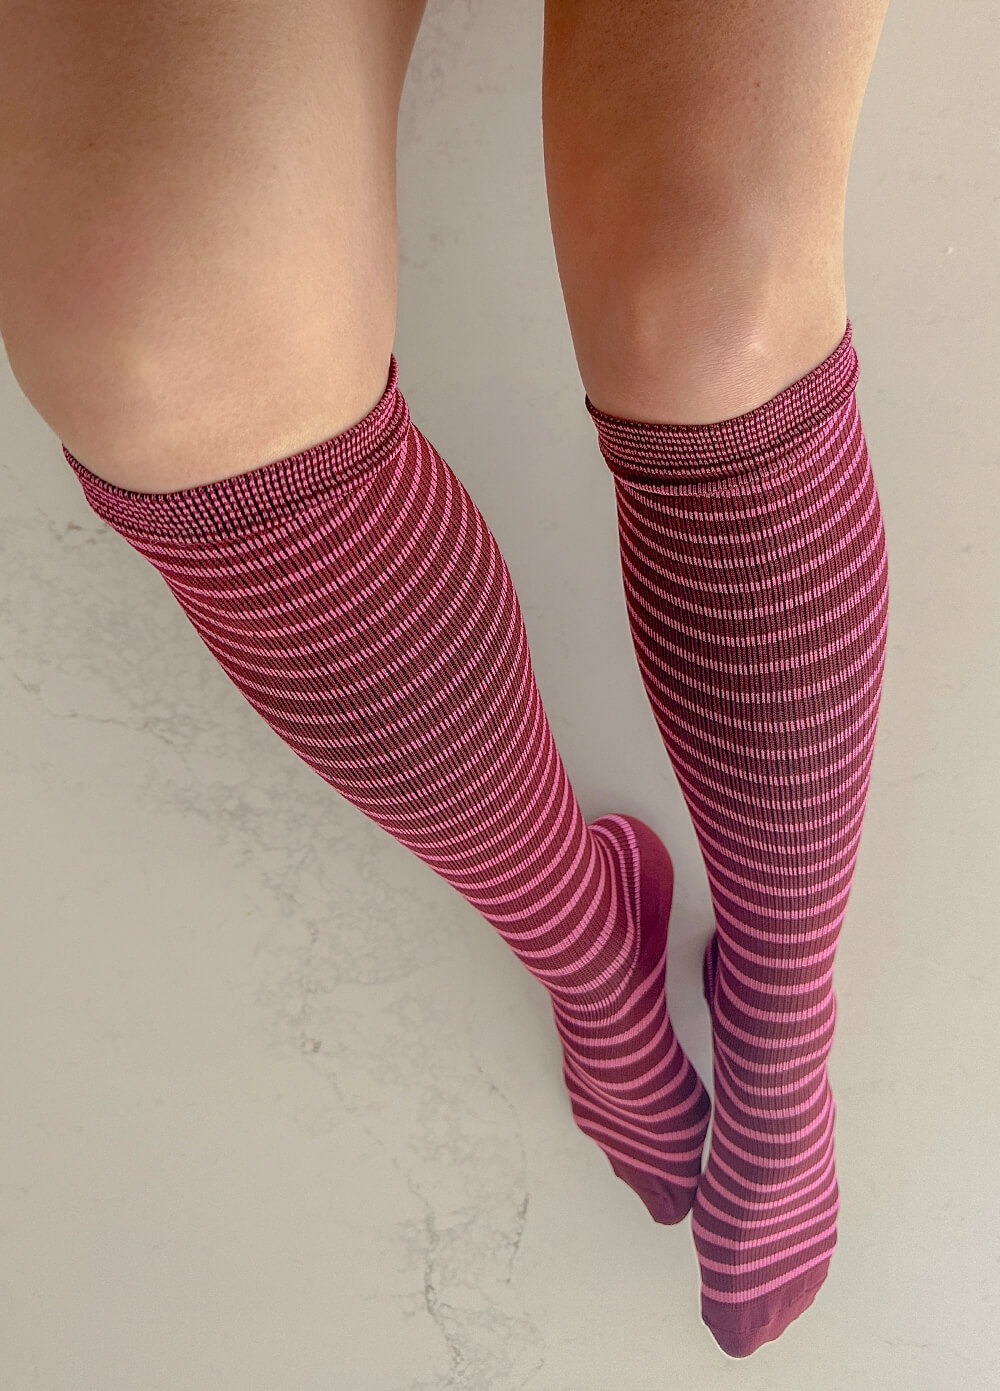 Mama Sox - Excite Maternity Compression Socks in Pink/Claret Stripe